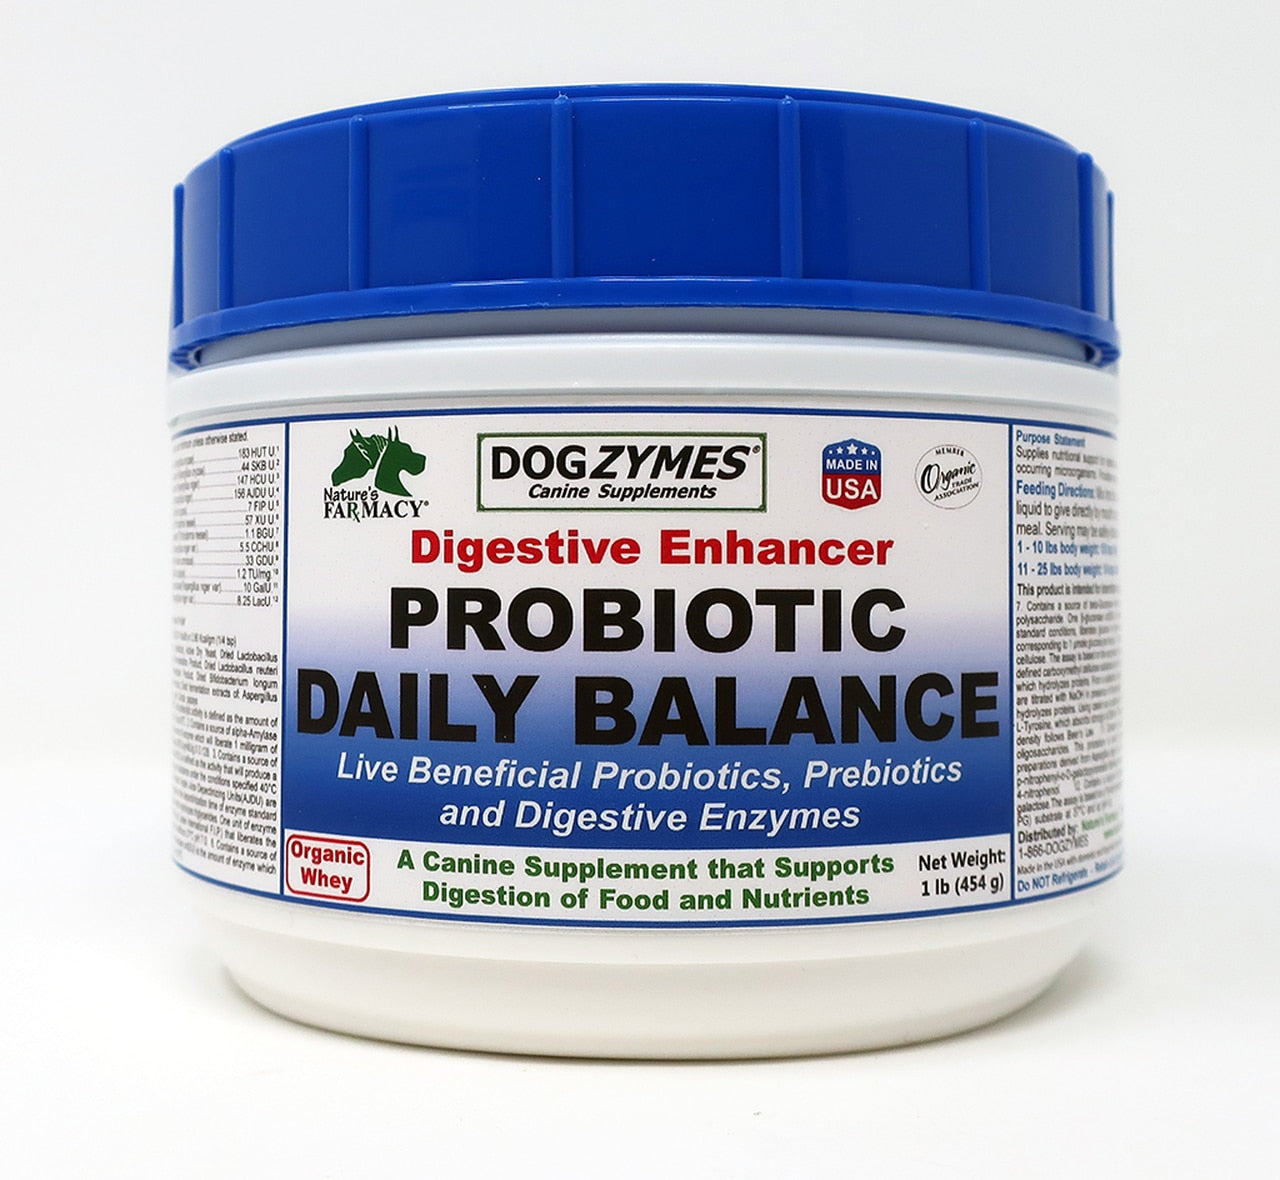 Nature's Farmacy Dogzymes Dis-solvable Probiotic Daily Balance Digestive Enhancer Supplement For Dogs